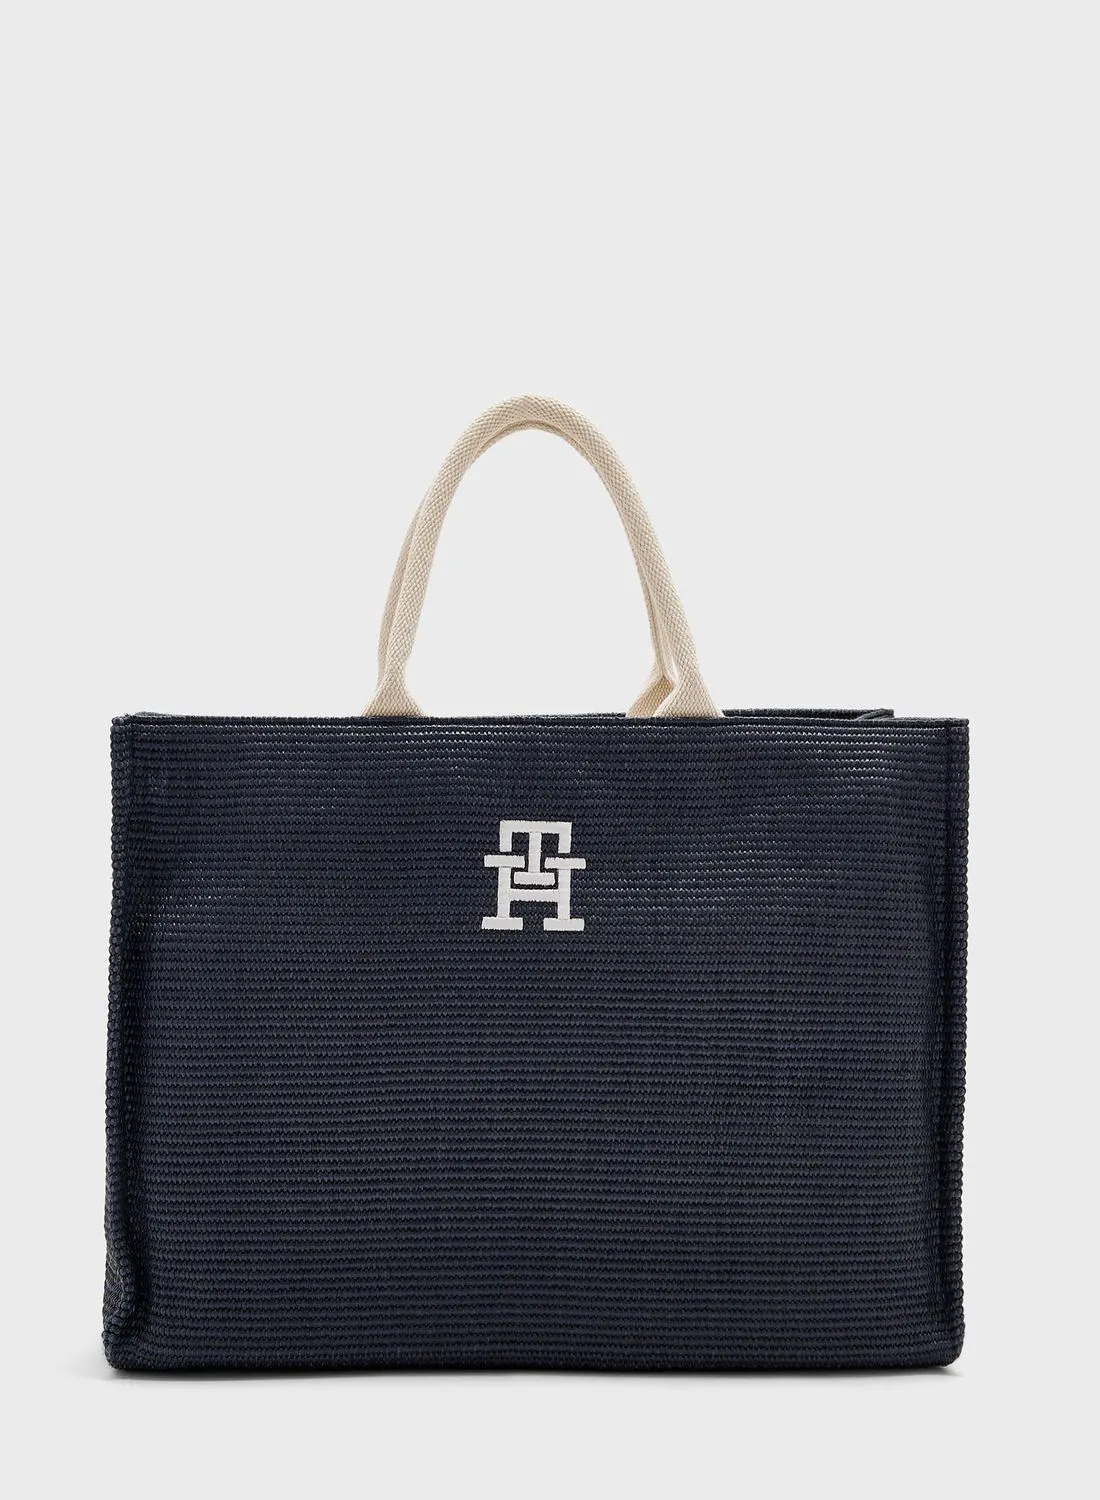 TOMMY HILFIGER Beach Tote